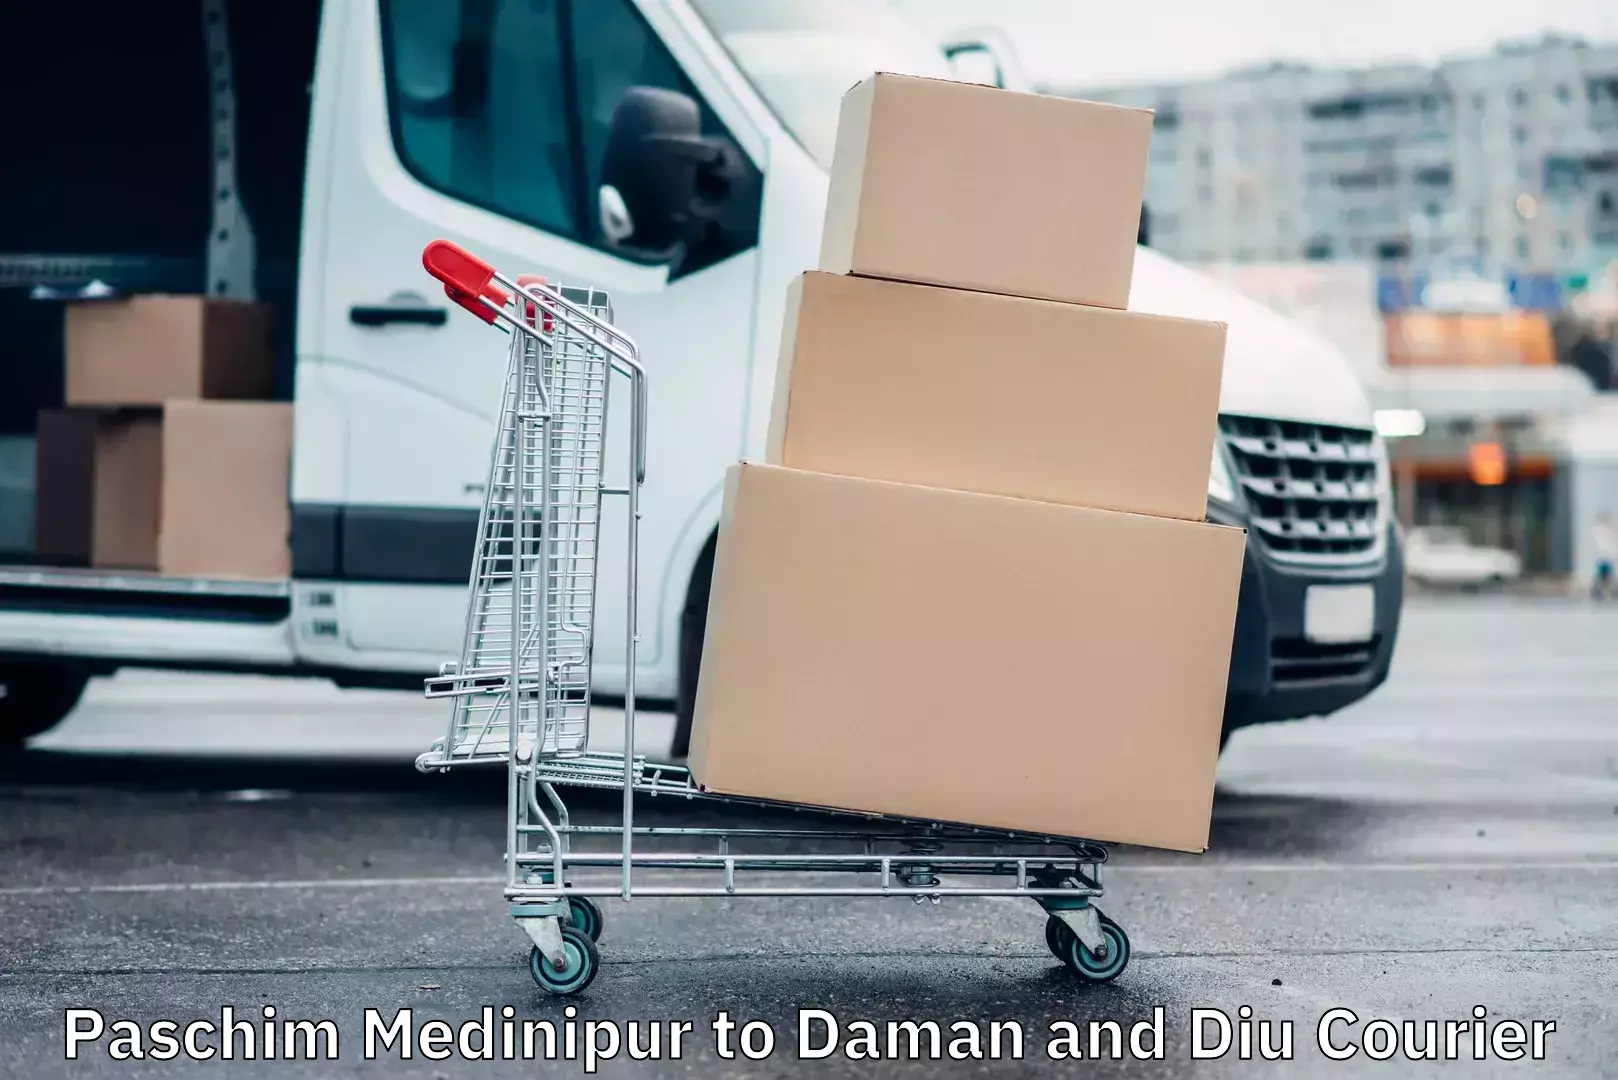 Courier service efficiency Paschim Medinipur to Daman and Diu